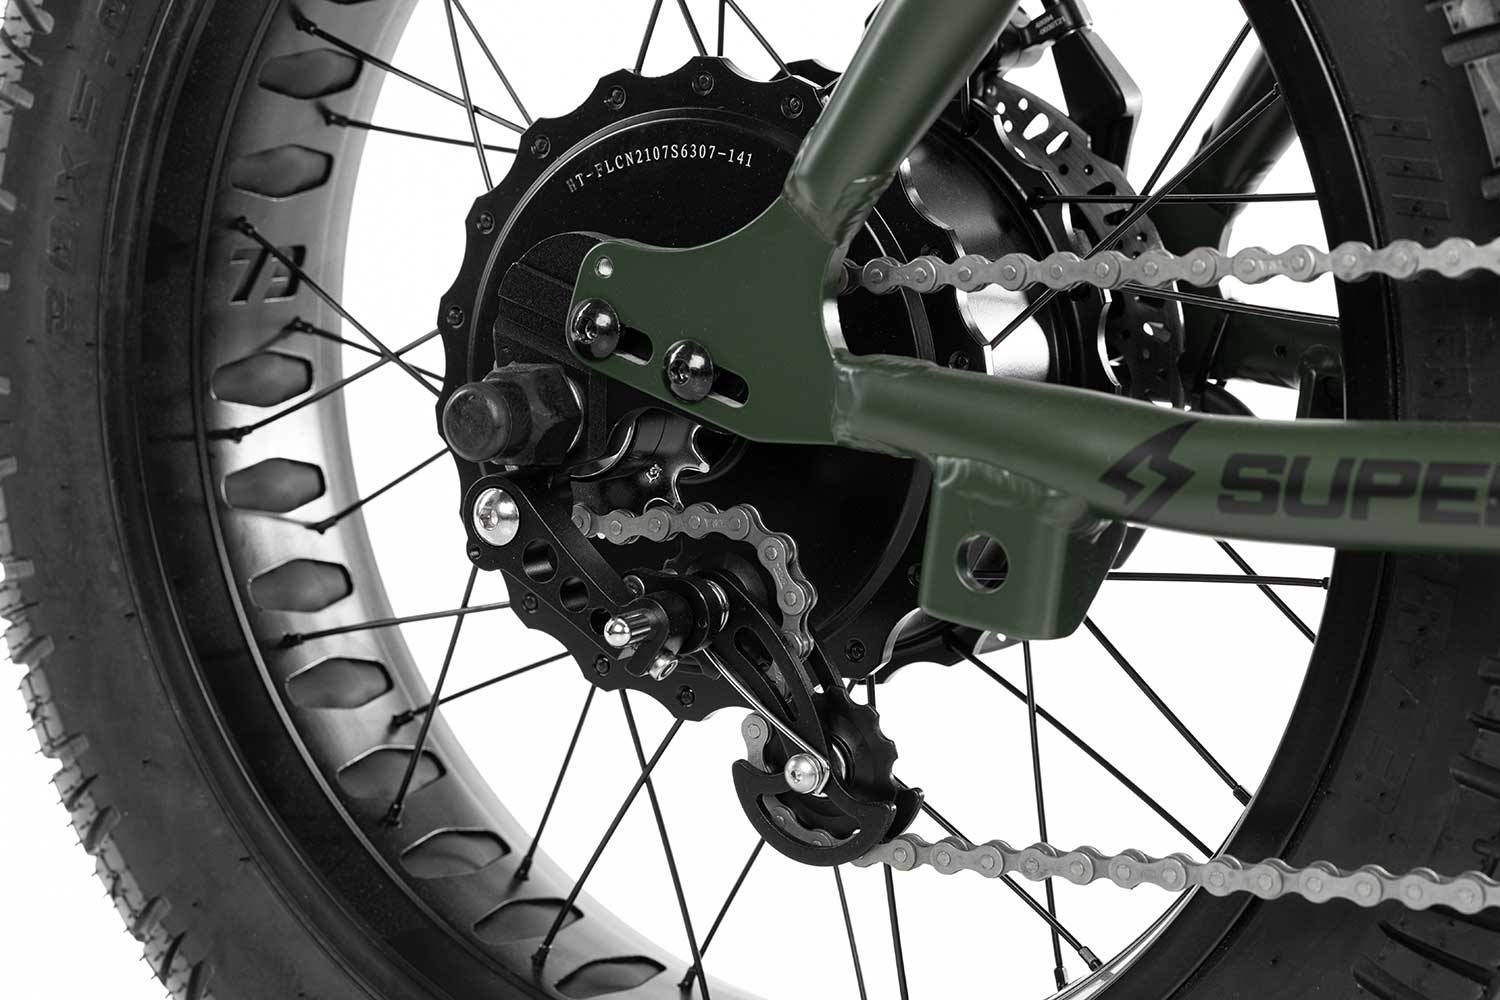 Closeup view of the Super73-R Olive Drab wheel hub and chain